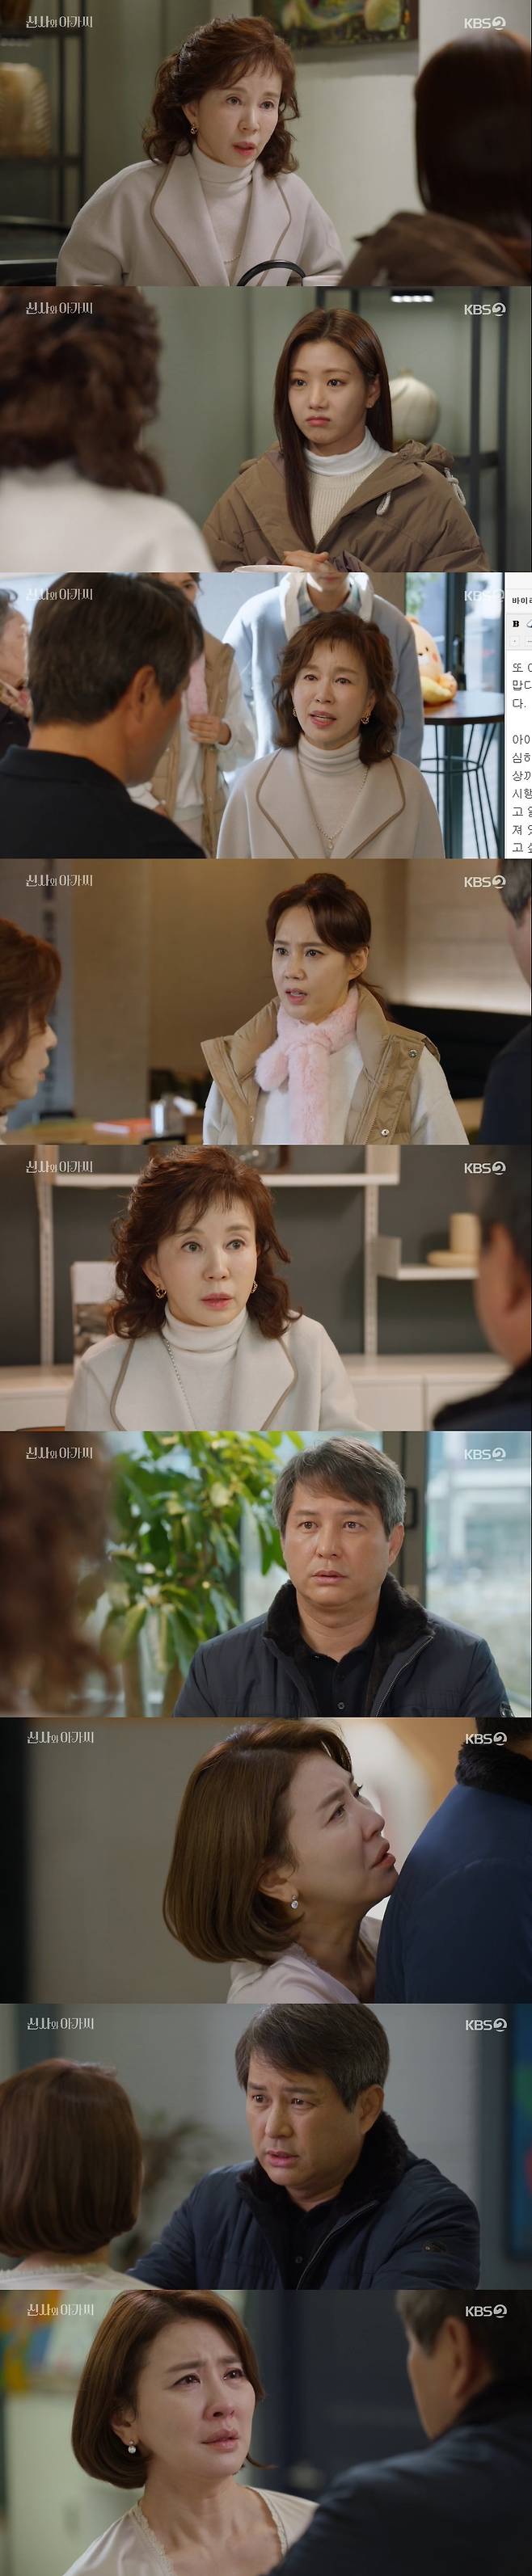 Seoul = = Gentleman and young lady Lee Jong-Won was drawn with an ending that shocked Lee Il-hwa when he noticed that he was his ex-wife.In the 31st episode of KBS 2TV weekend drama Shinto and Young Lady (directed by Shin Chang-seok/playplayplayed by Kim Sa-kyung), which was broadcast on the afternoon of the 8th, Lee Young-guk (played by Ji Hyun-woo) was portrayed angry at Jo Sa-ra (played by Park Ha-na).Lee Young-guk learned that Jo Sa-ra had Lee Se-chan (Yoo Jun-seo) and Sejong (Seo Woo-jin) in the warehouse, and told Jo Sa-ra, I do not deserve to be the mother of our children for one reason alone.If you have a minimum mind about your children, you can not do that, he said. I have tried to keep this engagement until the last three months of Memory is not felt and I have no feelings, but now I have no reason to do it, lets sort it out here.Surprised, Cho Sa-ra caught him and Lee Yeong-guk turned to him soberly, saying, This makes it harder for Cho Si-jang only.Park Dan-dan (Lee Se-hee) took a vacation at home with Lee Young-guks consideration.I dont know if its right to leave, he said to Anna Nicole Smithkim (Lee Il-hwa), who wants to go with him to the United States of America.Park Soo-cheol (Lee Jong-Won) was embarrassed by the tears of Park Dan-dan, and Anna Nicole Smith Kim announced that Park Dan-dan seemed to have a boyfriend.Park Su-cheol was surprised and when she wondered who she was, Anna Nicole Smith Kim said, She did not tell me who her boyfriend was.Lee Jae-ni (Choi Myung-bin), Lee Se-chan and Lee Sejong visited Park Dan-dans house, and they had a good time with Park Dan-dan, and Lee Young-guk, who learned about it, went to pick up his children.Lee Young-guk had a good time sharing Bung-dan and childrens bread, and after that, he started to worry more about the fact that the condition of the beat was not so good through the children.Cha Yeon-sil (Oh Hyun-kyung) visited Anna Nicole Smith Kim thanks for the fact that Anna Nicole Smith Kim was taking her husband Park Su-cheol to United States of America.He tried to clean up while Anna Nicole Smith Kim was on the phone, and then found a baby album, which he thought was similar to the baby in the picture when he was a beat baby.After that, Park Soo-cheol found the same picture as Park Dan-dans picture at Anna Nicole Smith Kims house, and Park Soo-cheol did not believe it.Jang Mi-sook (Lim Ye-jin) asked Park Dan-dan why he did not tell her that Cha Yeon-sil was not his biological mother.Park Dan-dan said his mother had passed away and said he did not have a picture and did not know where the grave was.Jang Soo-sook, who heard this, went to Park Soo-cheol and asked if he had abandoned Parks mother by an affair with Cha Yeon-sil.I did not abandon this person, said the angry Cha Yeon-sil. I saved my mother from leaving Su-cheol and Dan-dan and trying to die, why did I make a bad person to my brother?Jang Mi-suk solved the misunderstanding.Park Soo-chul recalled another memory that Cha Yeon-sil saved when he tried to die with Park Dan-dan in the past.He went to Anna Nicole Smith Kim and said, I can not go to United States of America with that representative. I can never leave my family, I will not come here even if I am sick now, I have been grateful for it, I will not forget my grace. Anna Nicole Smith Kim grabbed Park Soo-cheol and said, Why do you do this? I did it or did it wrong, do not do this. Park Soo-cheol said, The representative has done nothing wrong, no matter how hard it is, I have to be with my family, but I did something wrong that I should not know about the fountain.Anna Nicole Smith Kim vowed, Mr. Su-cheol and Dan-dan will take him at any cost.Anna Nicole Smith Kim visited the tea room and asked for persuasion, saying that she would raise Park Soo-cheols salary.Cha Yeon-sil tried to persuade Park Soo-cheol that his salary was over 200 million, but Park Soo-cheol was stubborn.Park Su-cheol went to Anna Nicole Smith-Kim and told her not to shake my family with money if her heart is real.Park Soo-chul was shocked to find two dots on the back of Anna Nicole Smith Kim, who turned around. Park Soo-chul, who looked shocked, looked angry.